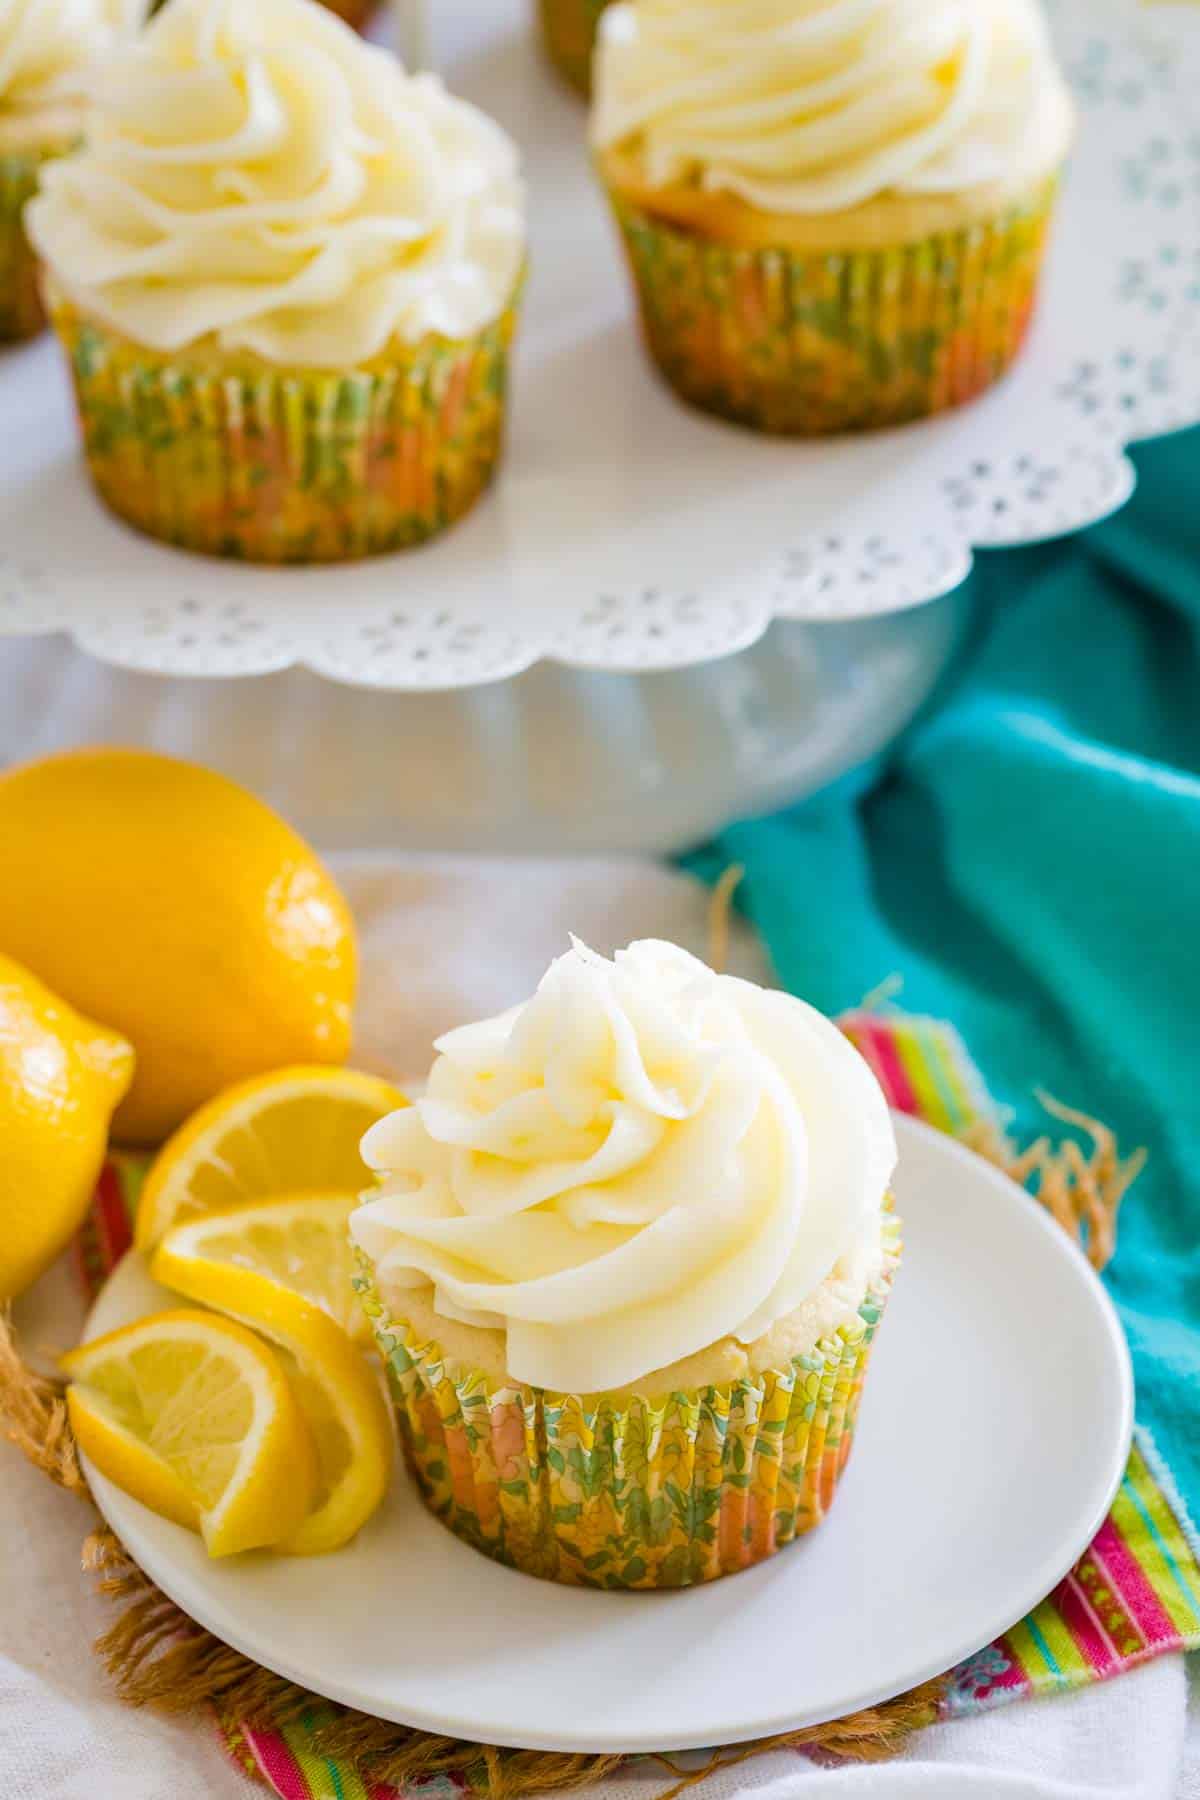 A frosted gluten-free lemon cupcake on a white plate next to lemon slices, with more cupcakes on a cupcake stand in the background.